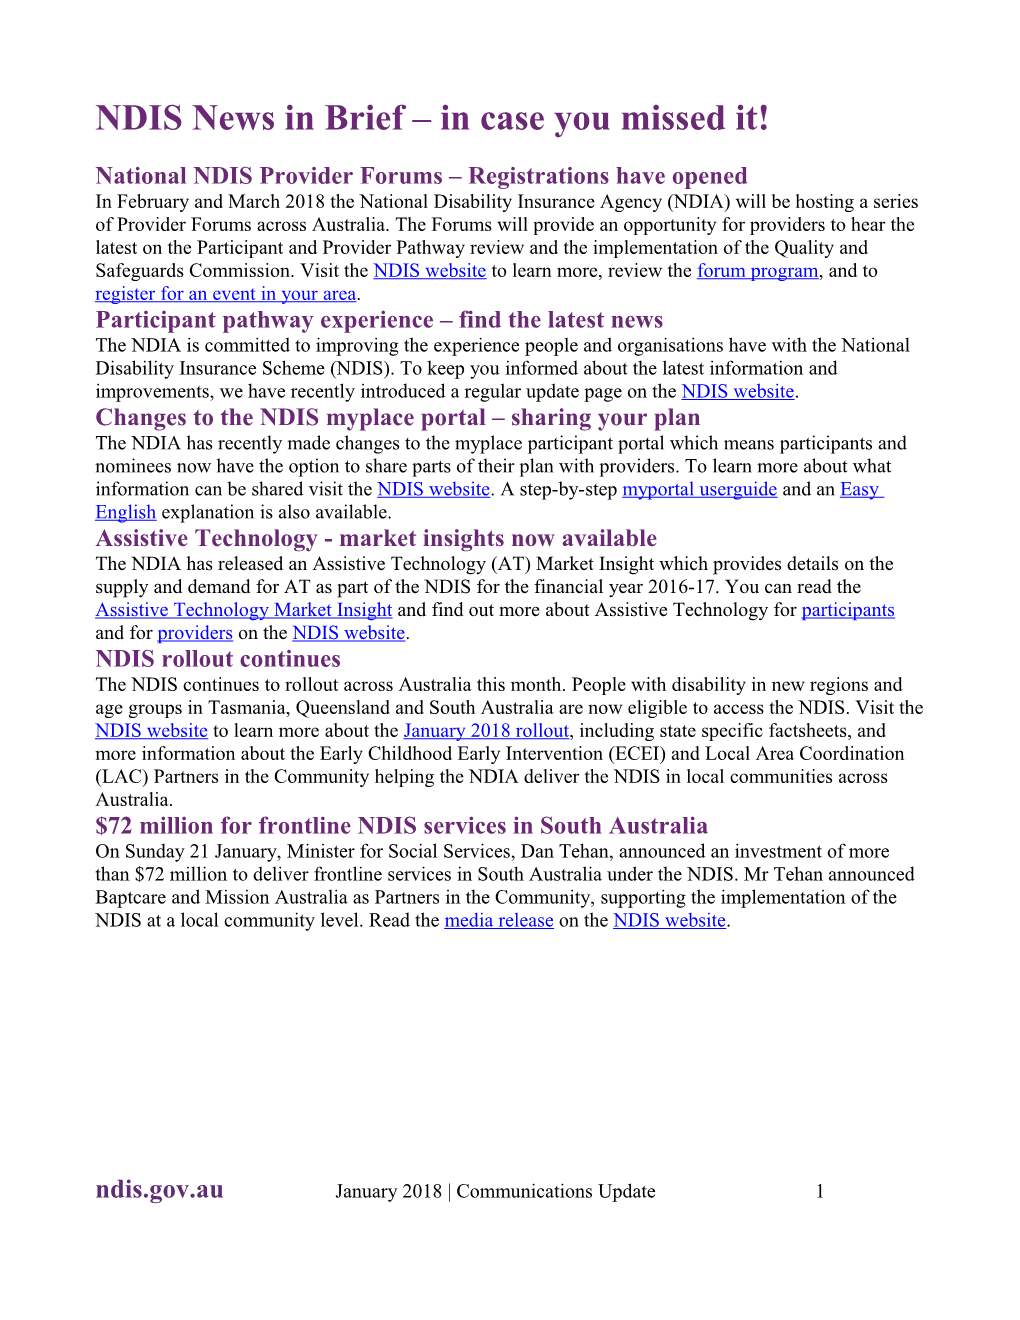 National NDIS Provider Forums Registrations Have Opened